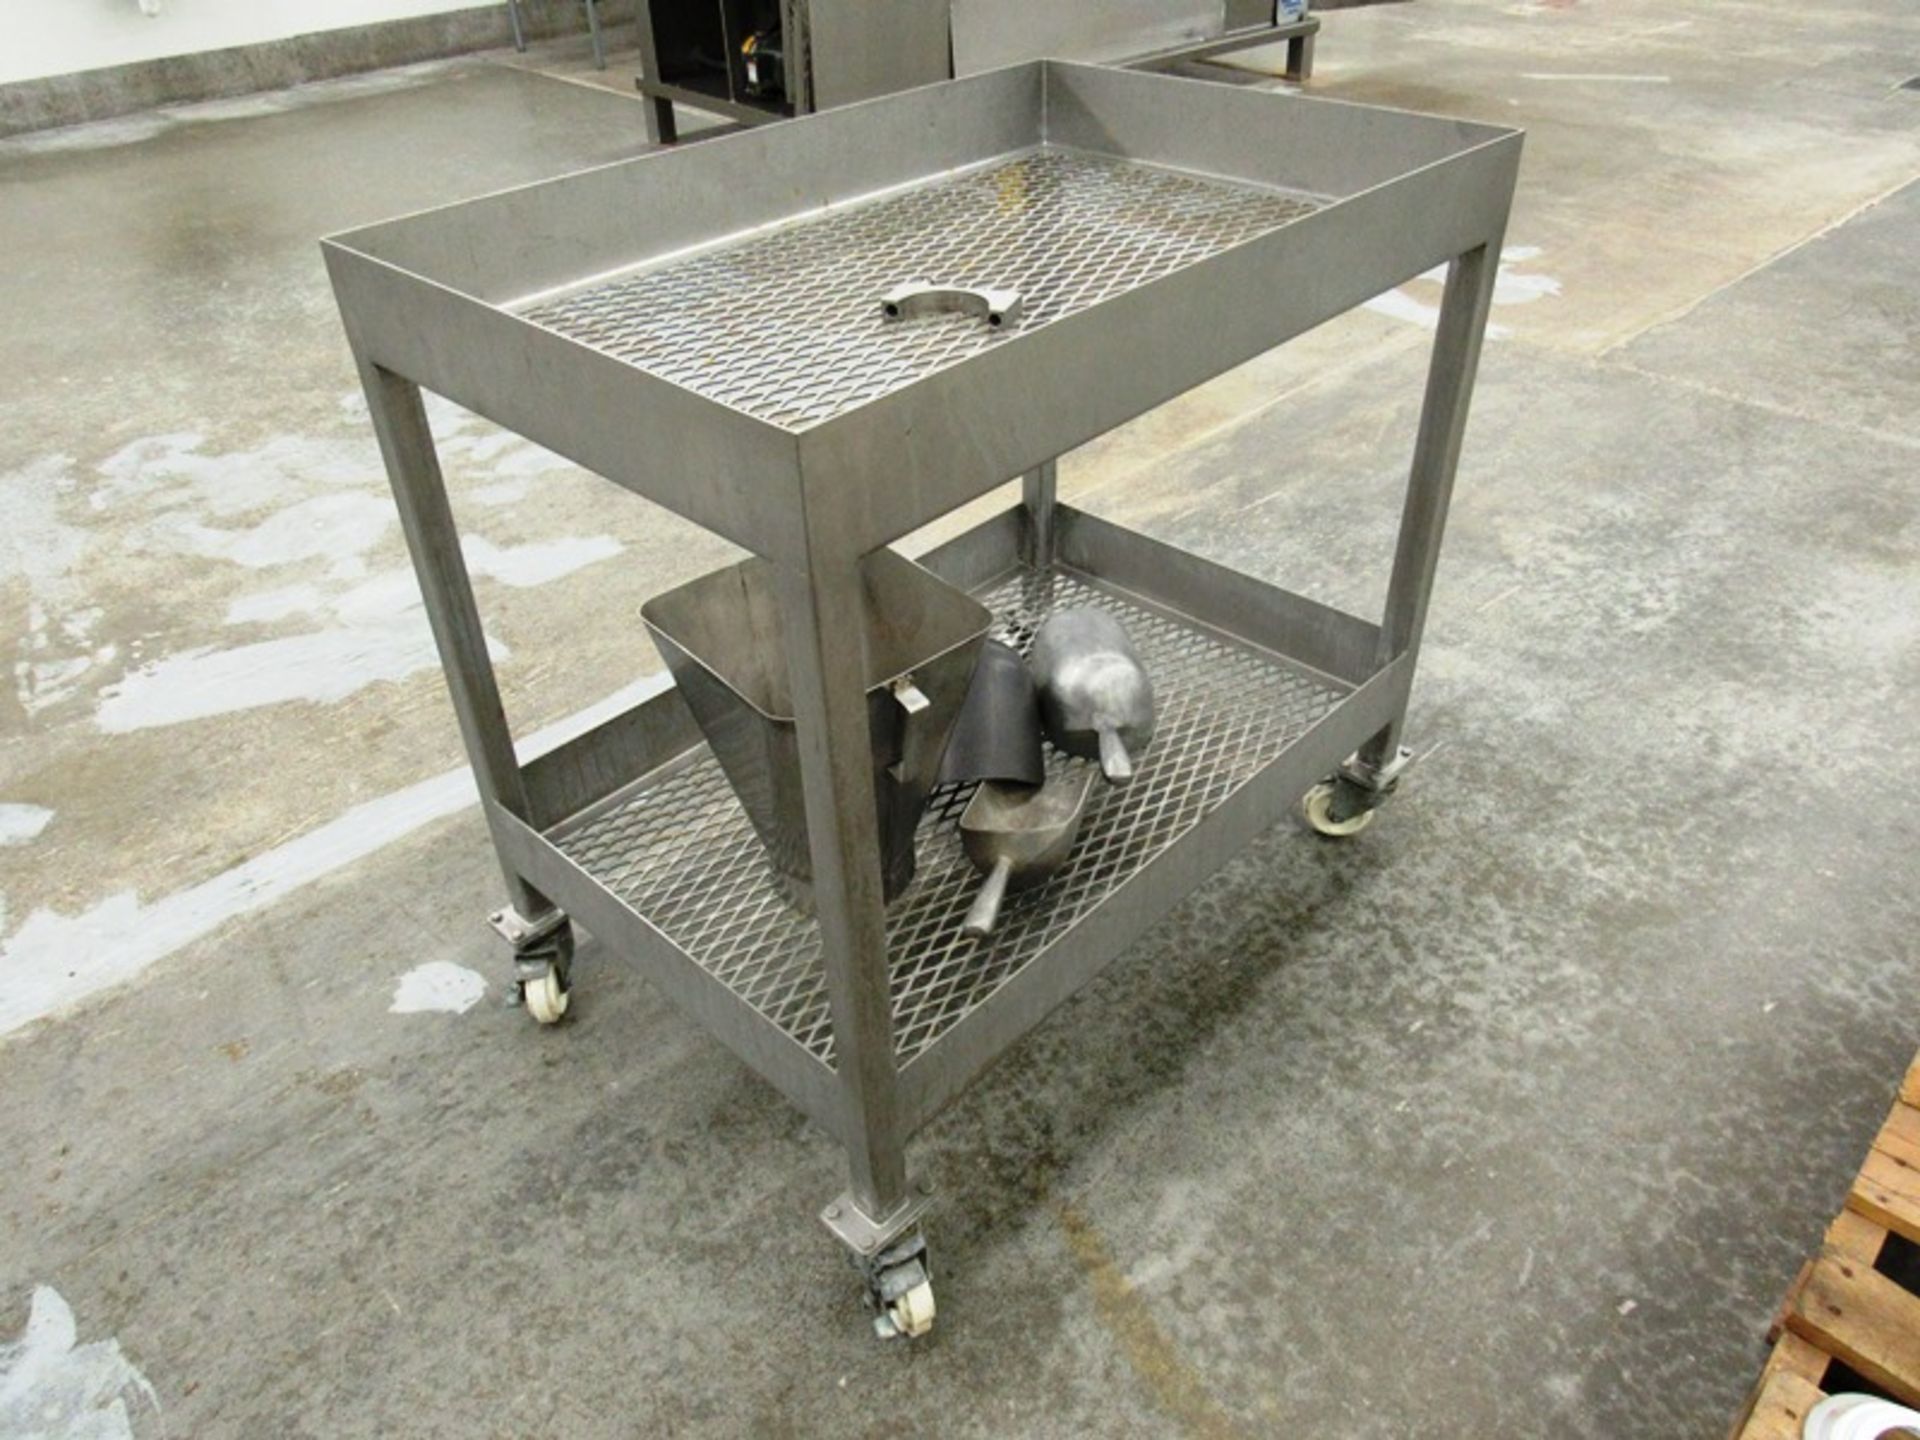 Stainless Steel Cart, 24" W X 36" L X 35" T (Removal Begins July 5th) Loading Fee $35 Rigger: Norm - Bild 2 aus 2